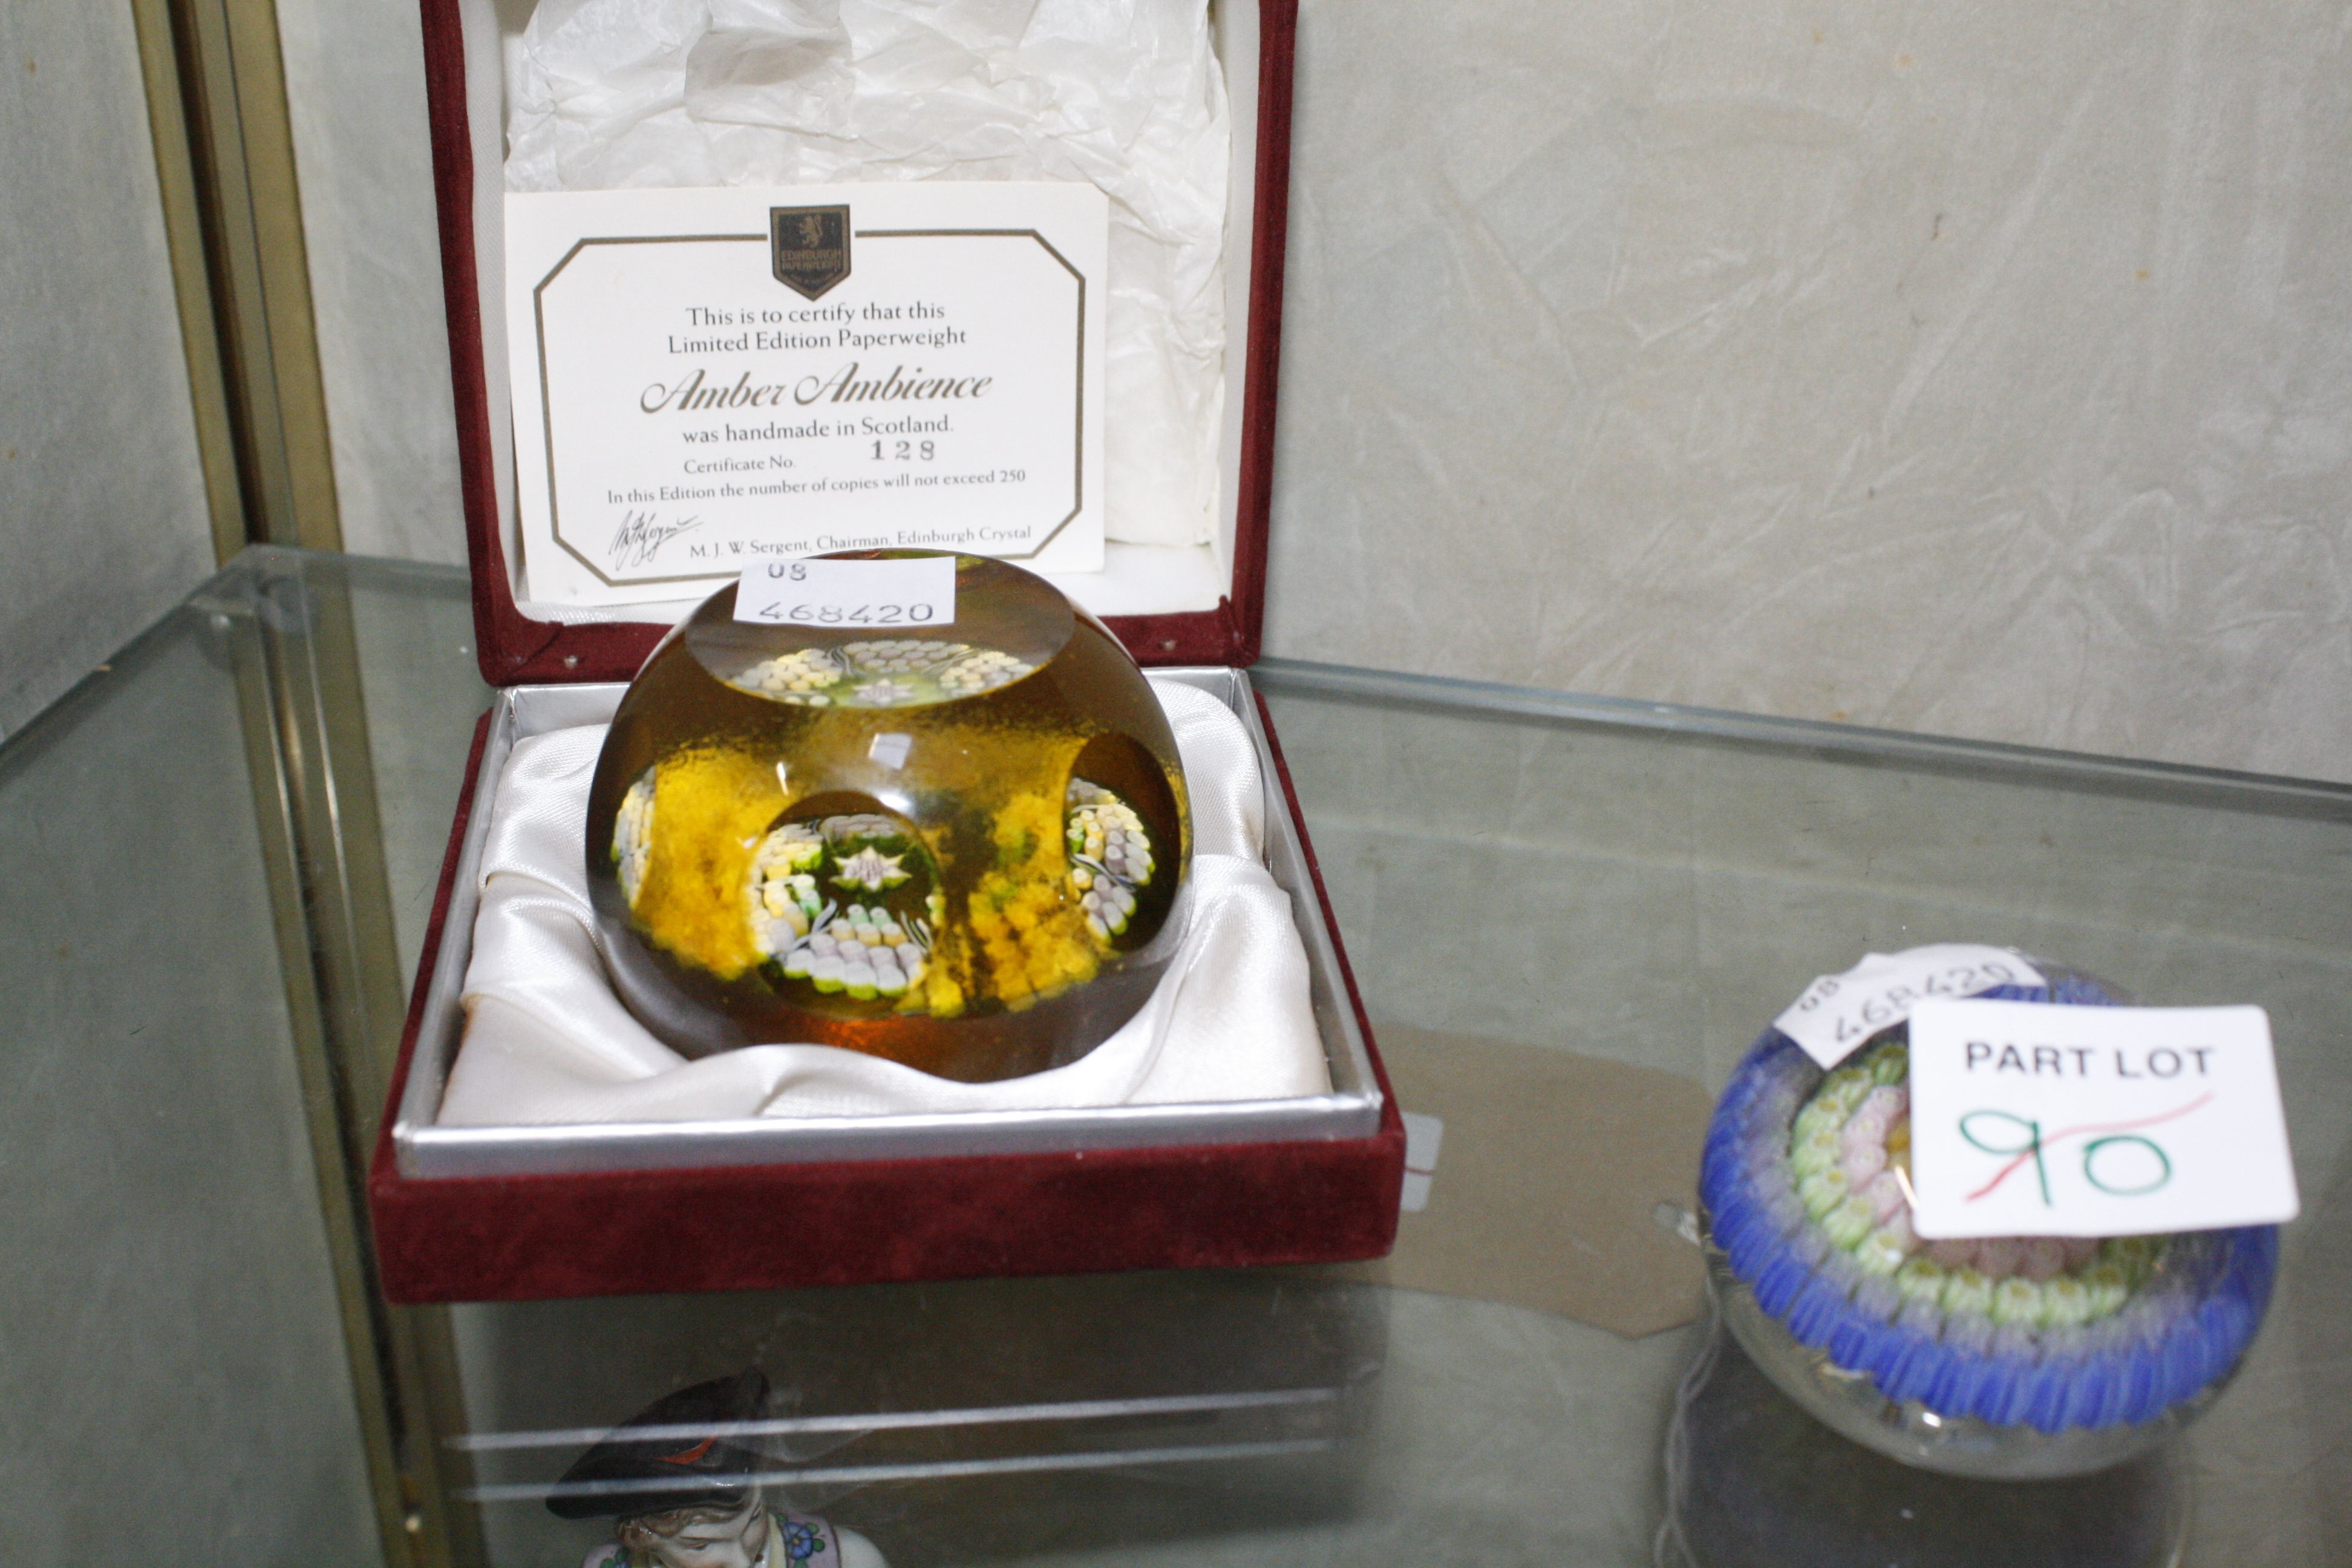 Two Edinburgh paperweights, a Langham paperweight, two other paperweights and a glass bird whistle